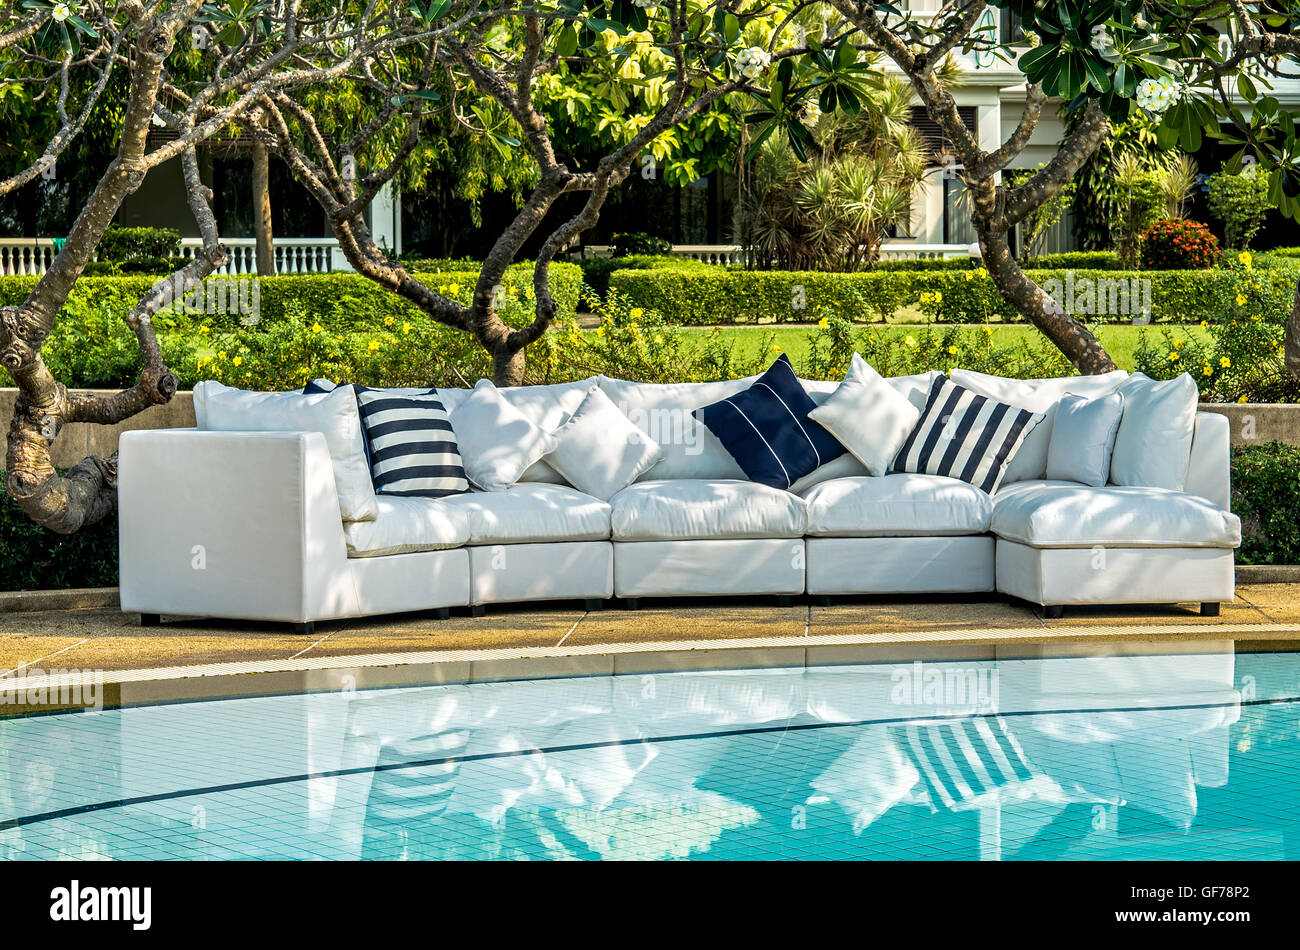 Outdoor indoor sofa with water resistant pillows Stock Photo